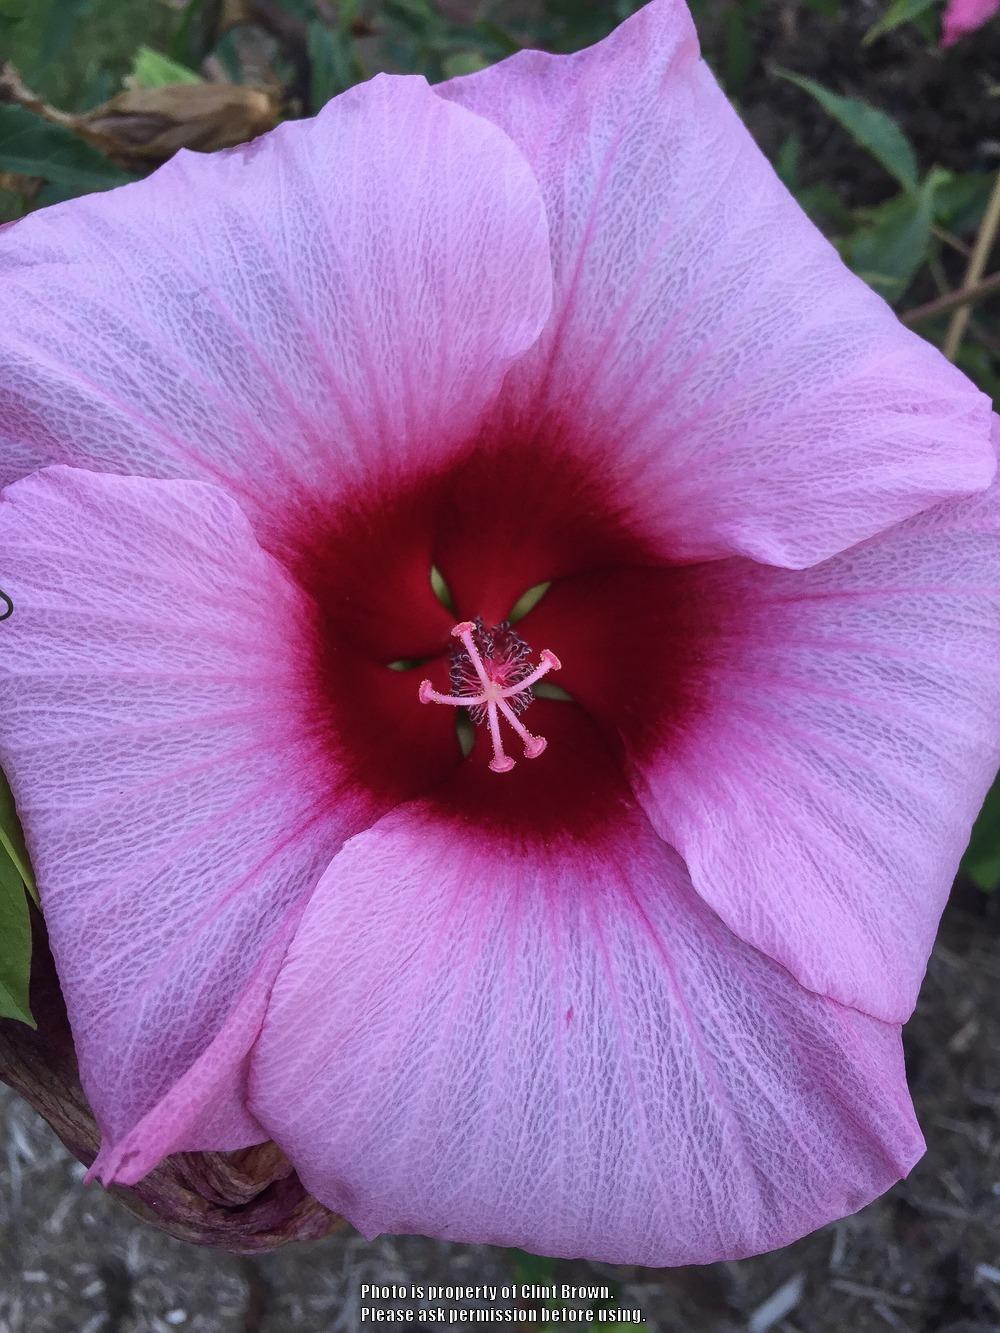 Photo of Hybrid Hardy Hibiscus (Hibiscus 'Lady Baltimore') uploaded by clintbrown